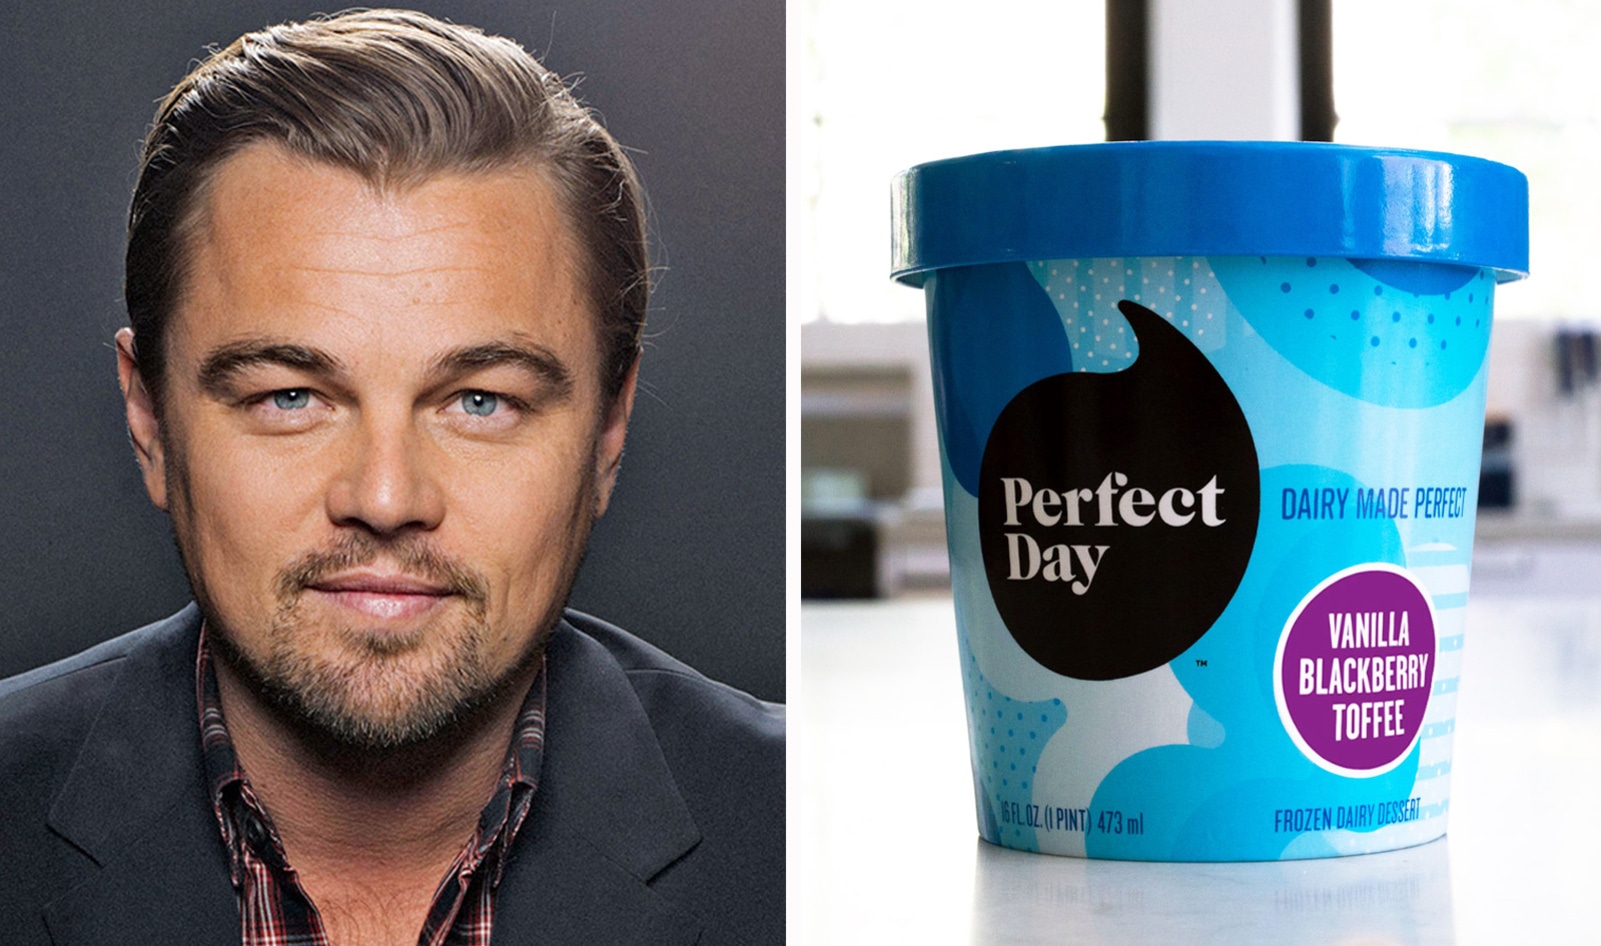 Leonardo DiCaprio Joins Startup Perfect Day to Fight Climate Change with Animal-Free Dairy&nbsp;